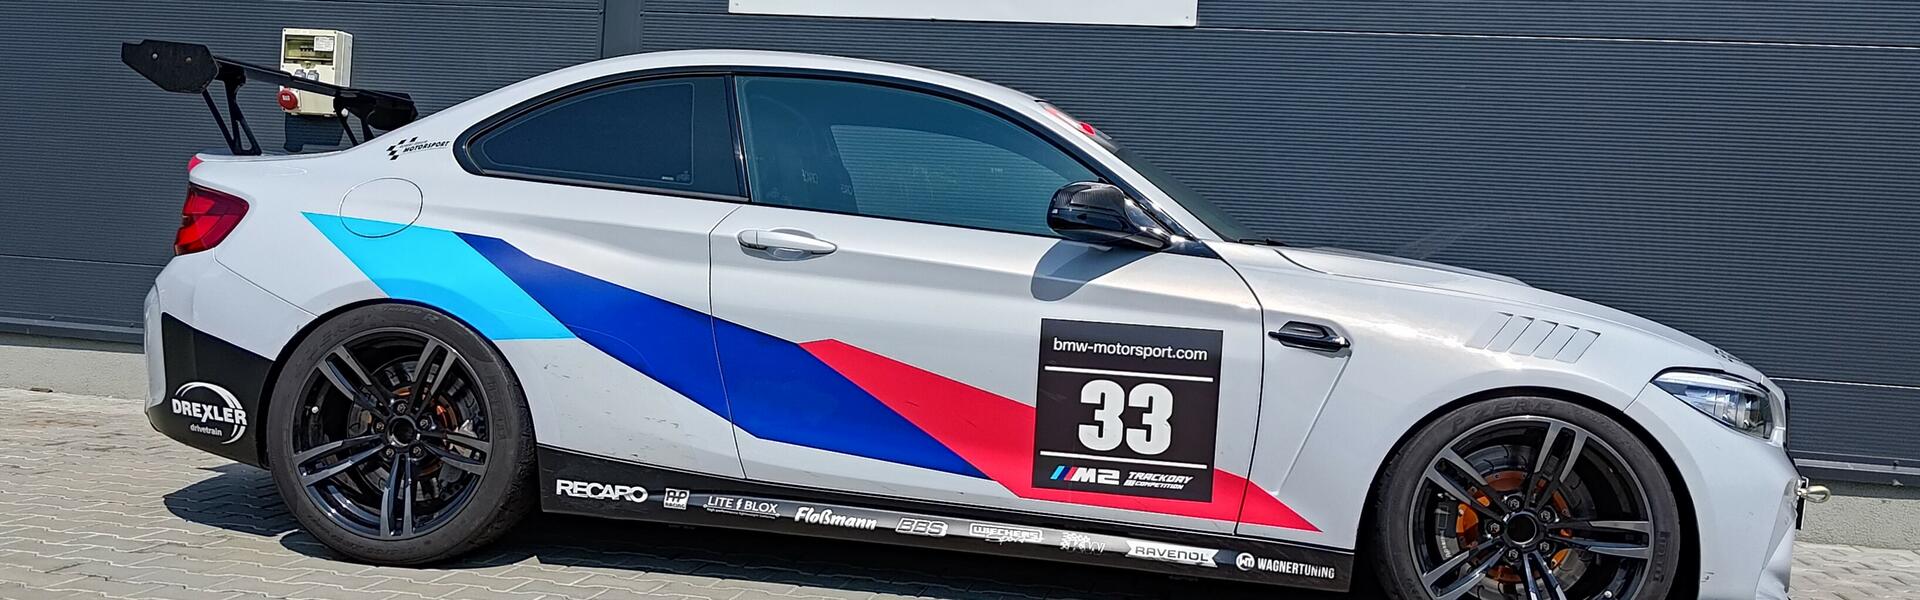 BMW M2 Competition TrackdayEvo - car for sale